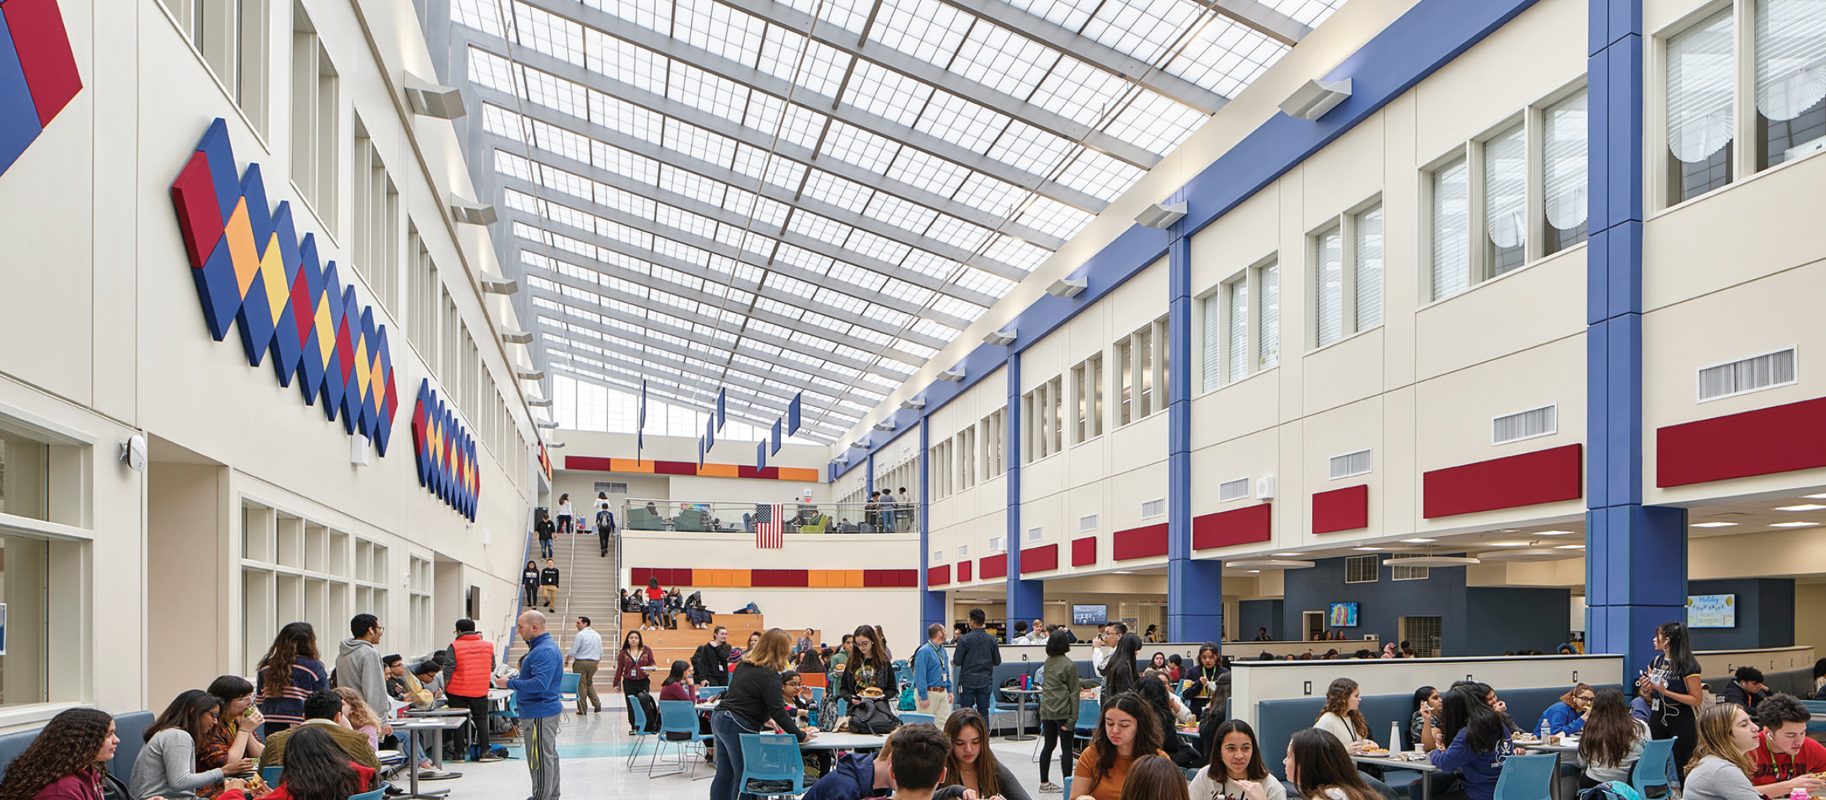 Kalwall skyroof® over students in cafeteria at Hudson County Tech High School in Secaucus, New Jersey